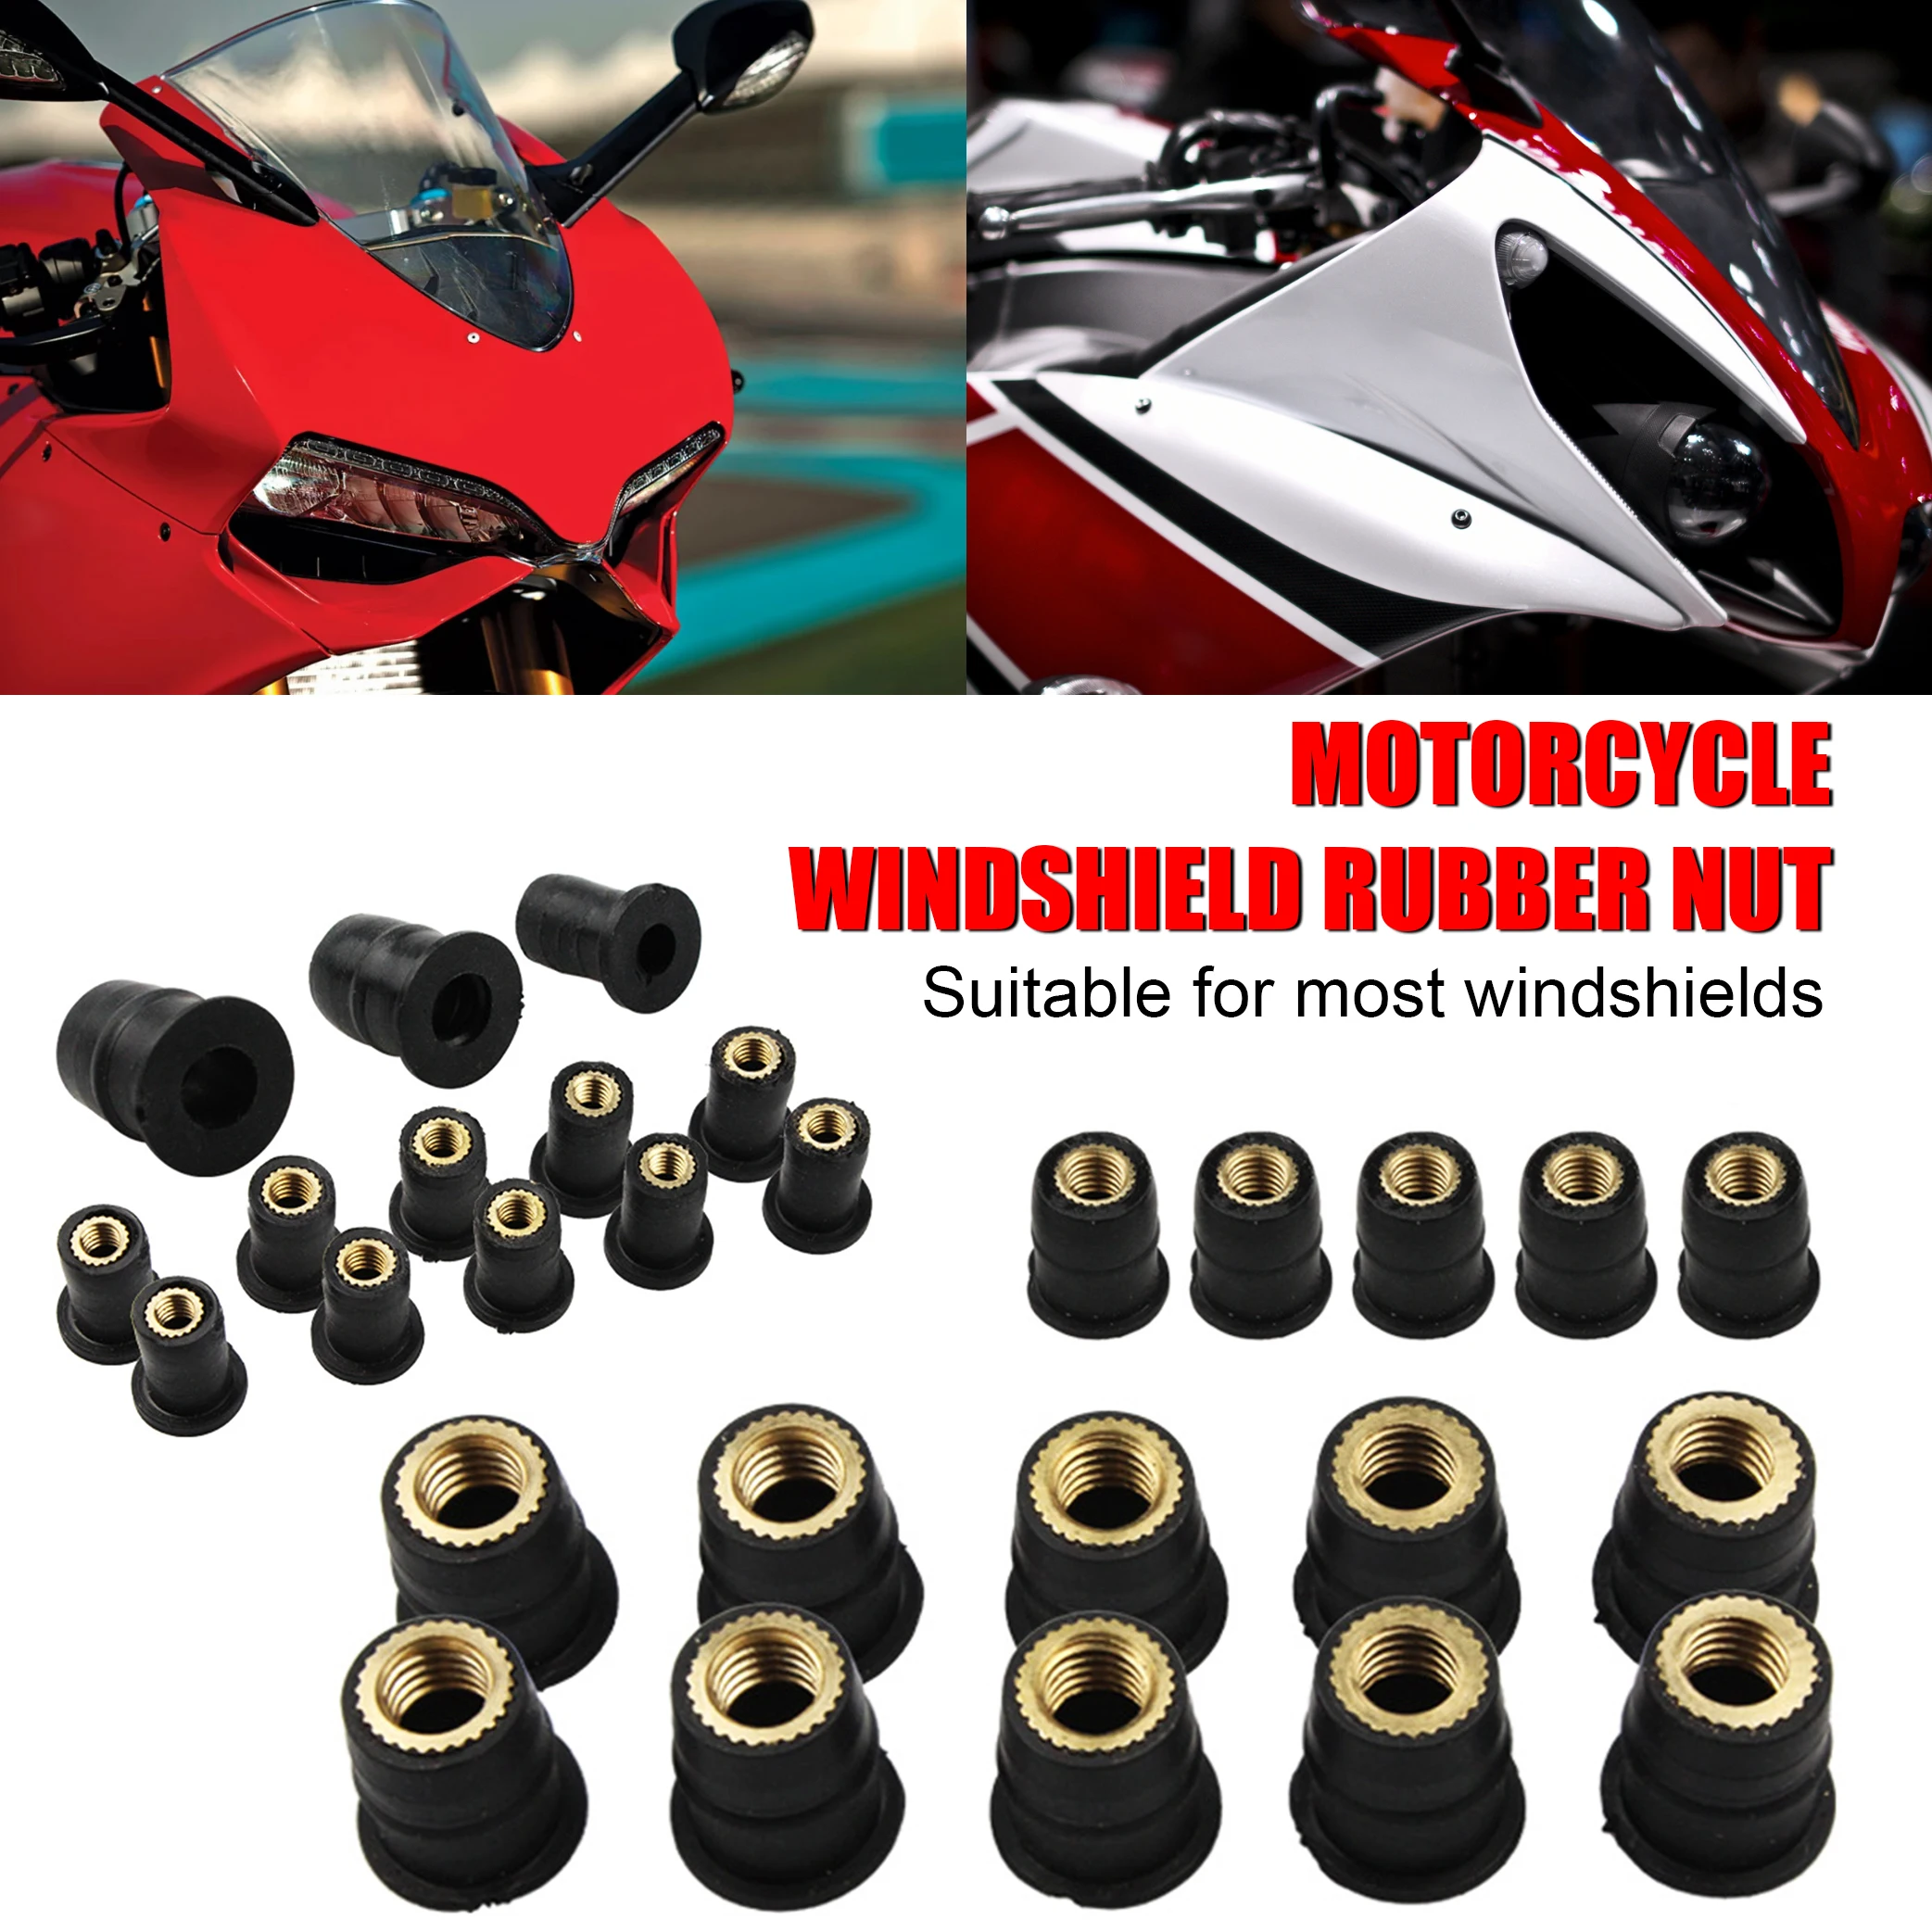 

10Pcs Motorcycle Windshield Nuts M4/M5/M6 Rubber Windshield Fairing Bolt Nut Fastener Universal Motorcycle Accessories